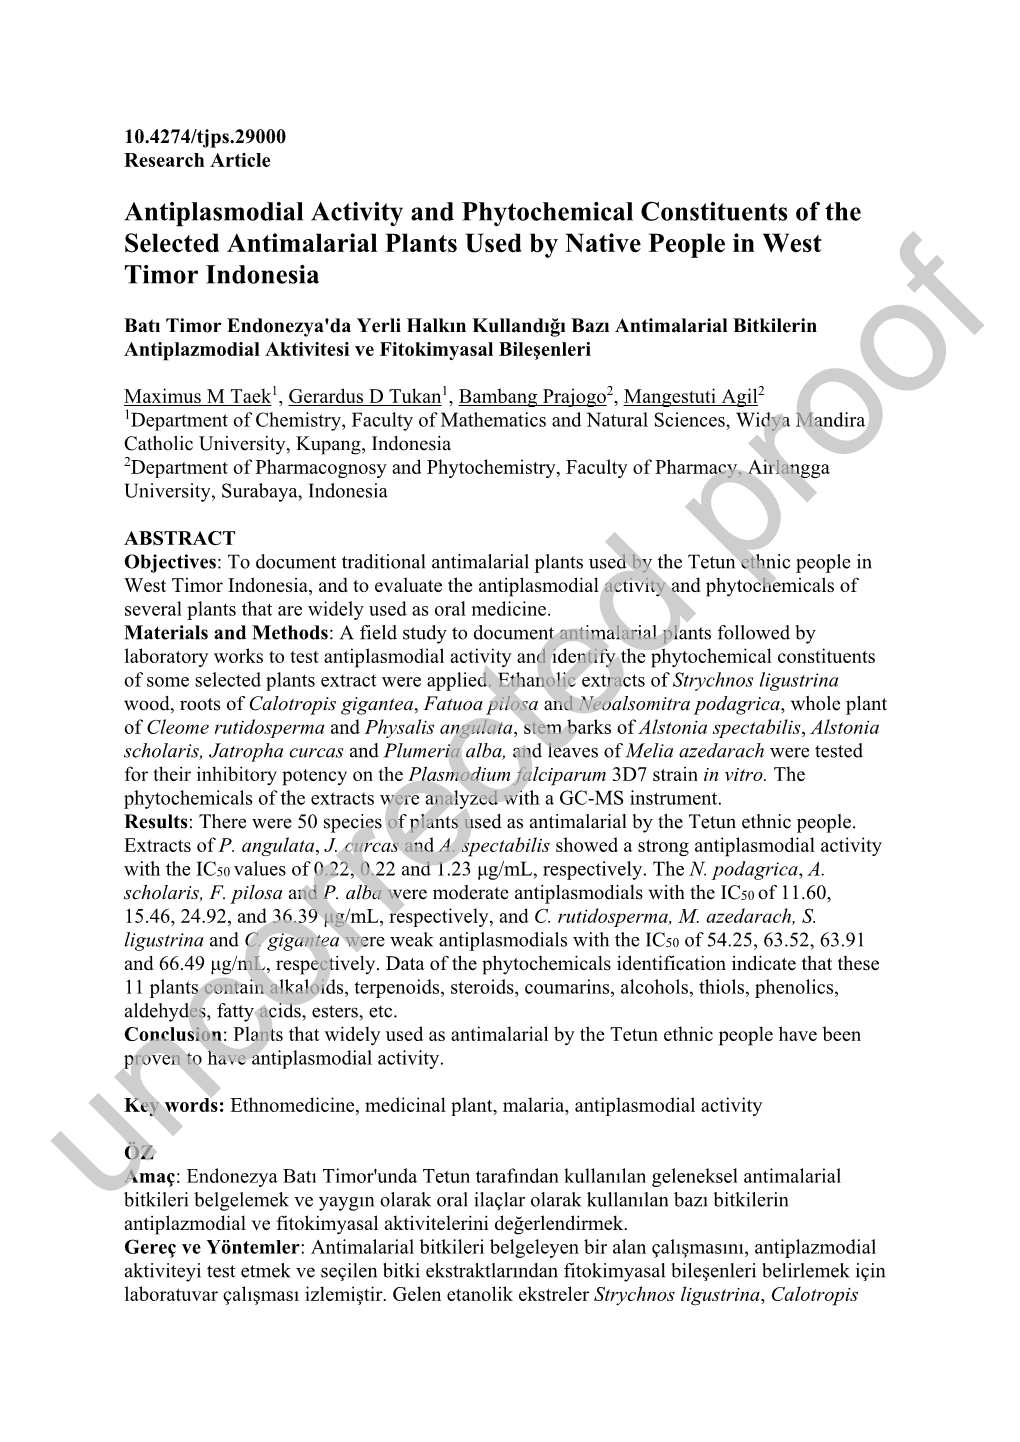 Antiplasmodial Activity and Phytochemical Constituents of the Selected Antimalarial Plants Used by Native People in West Timor Indonesia